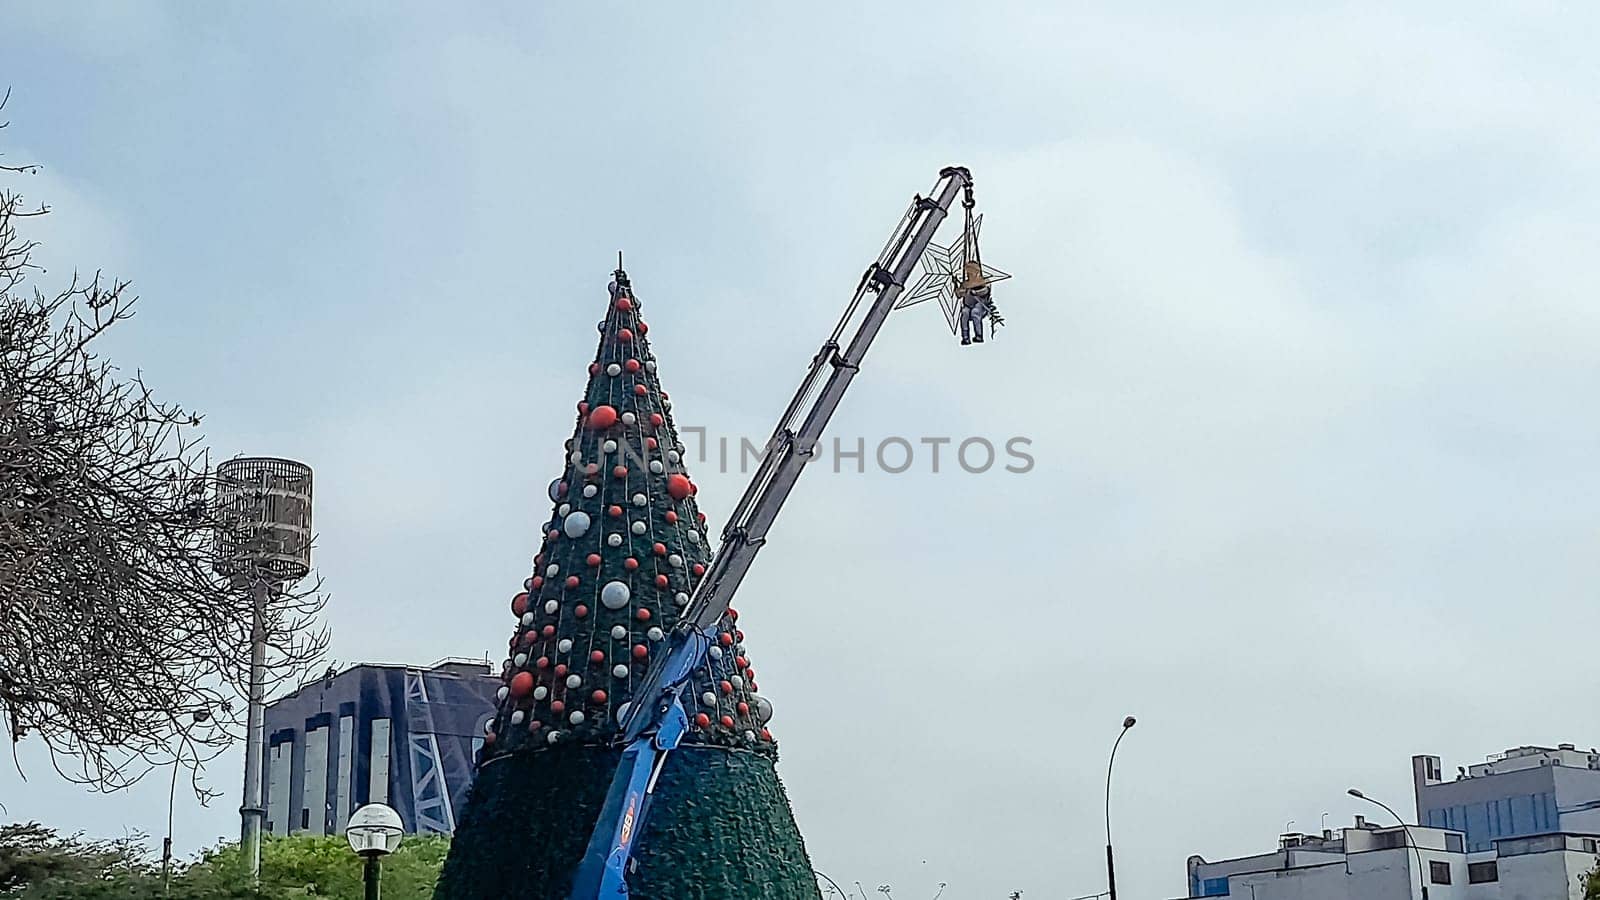 Man on crane decorating big Christmas tree in the city. by Peruphotoart